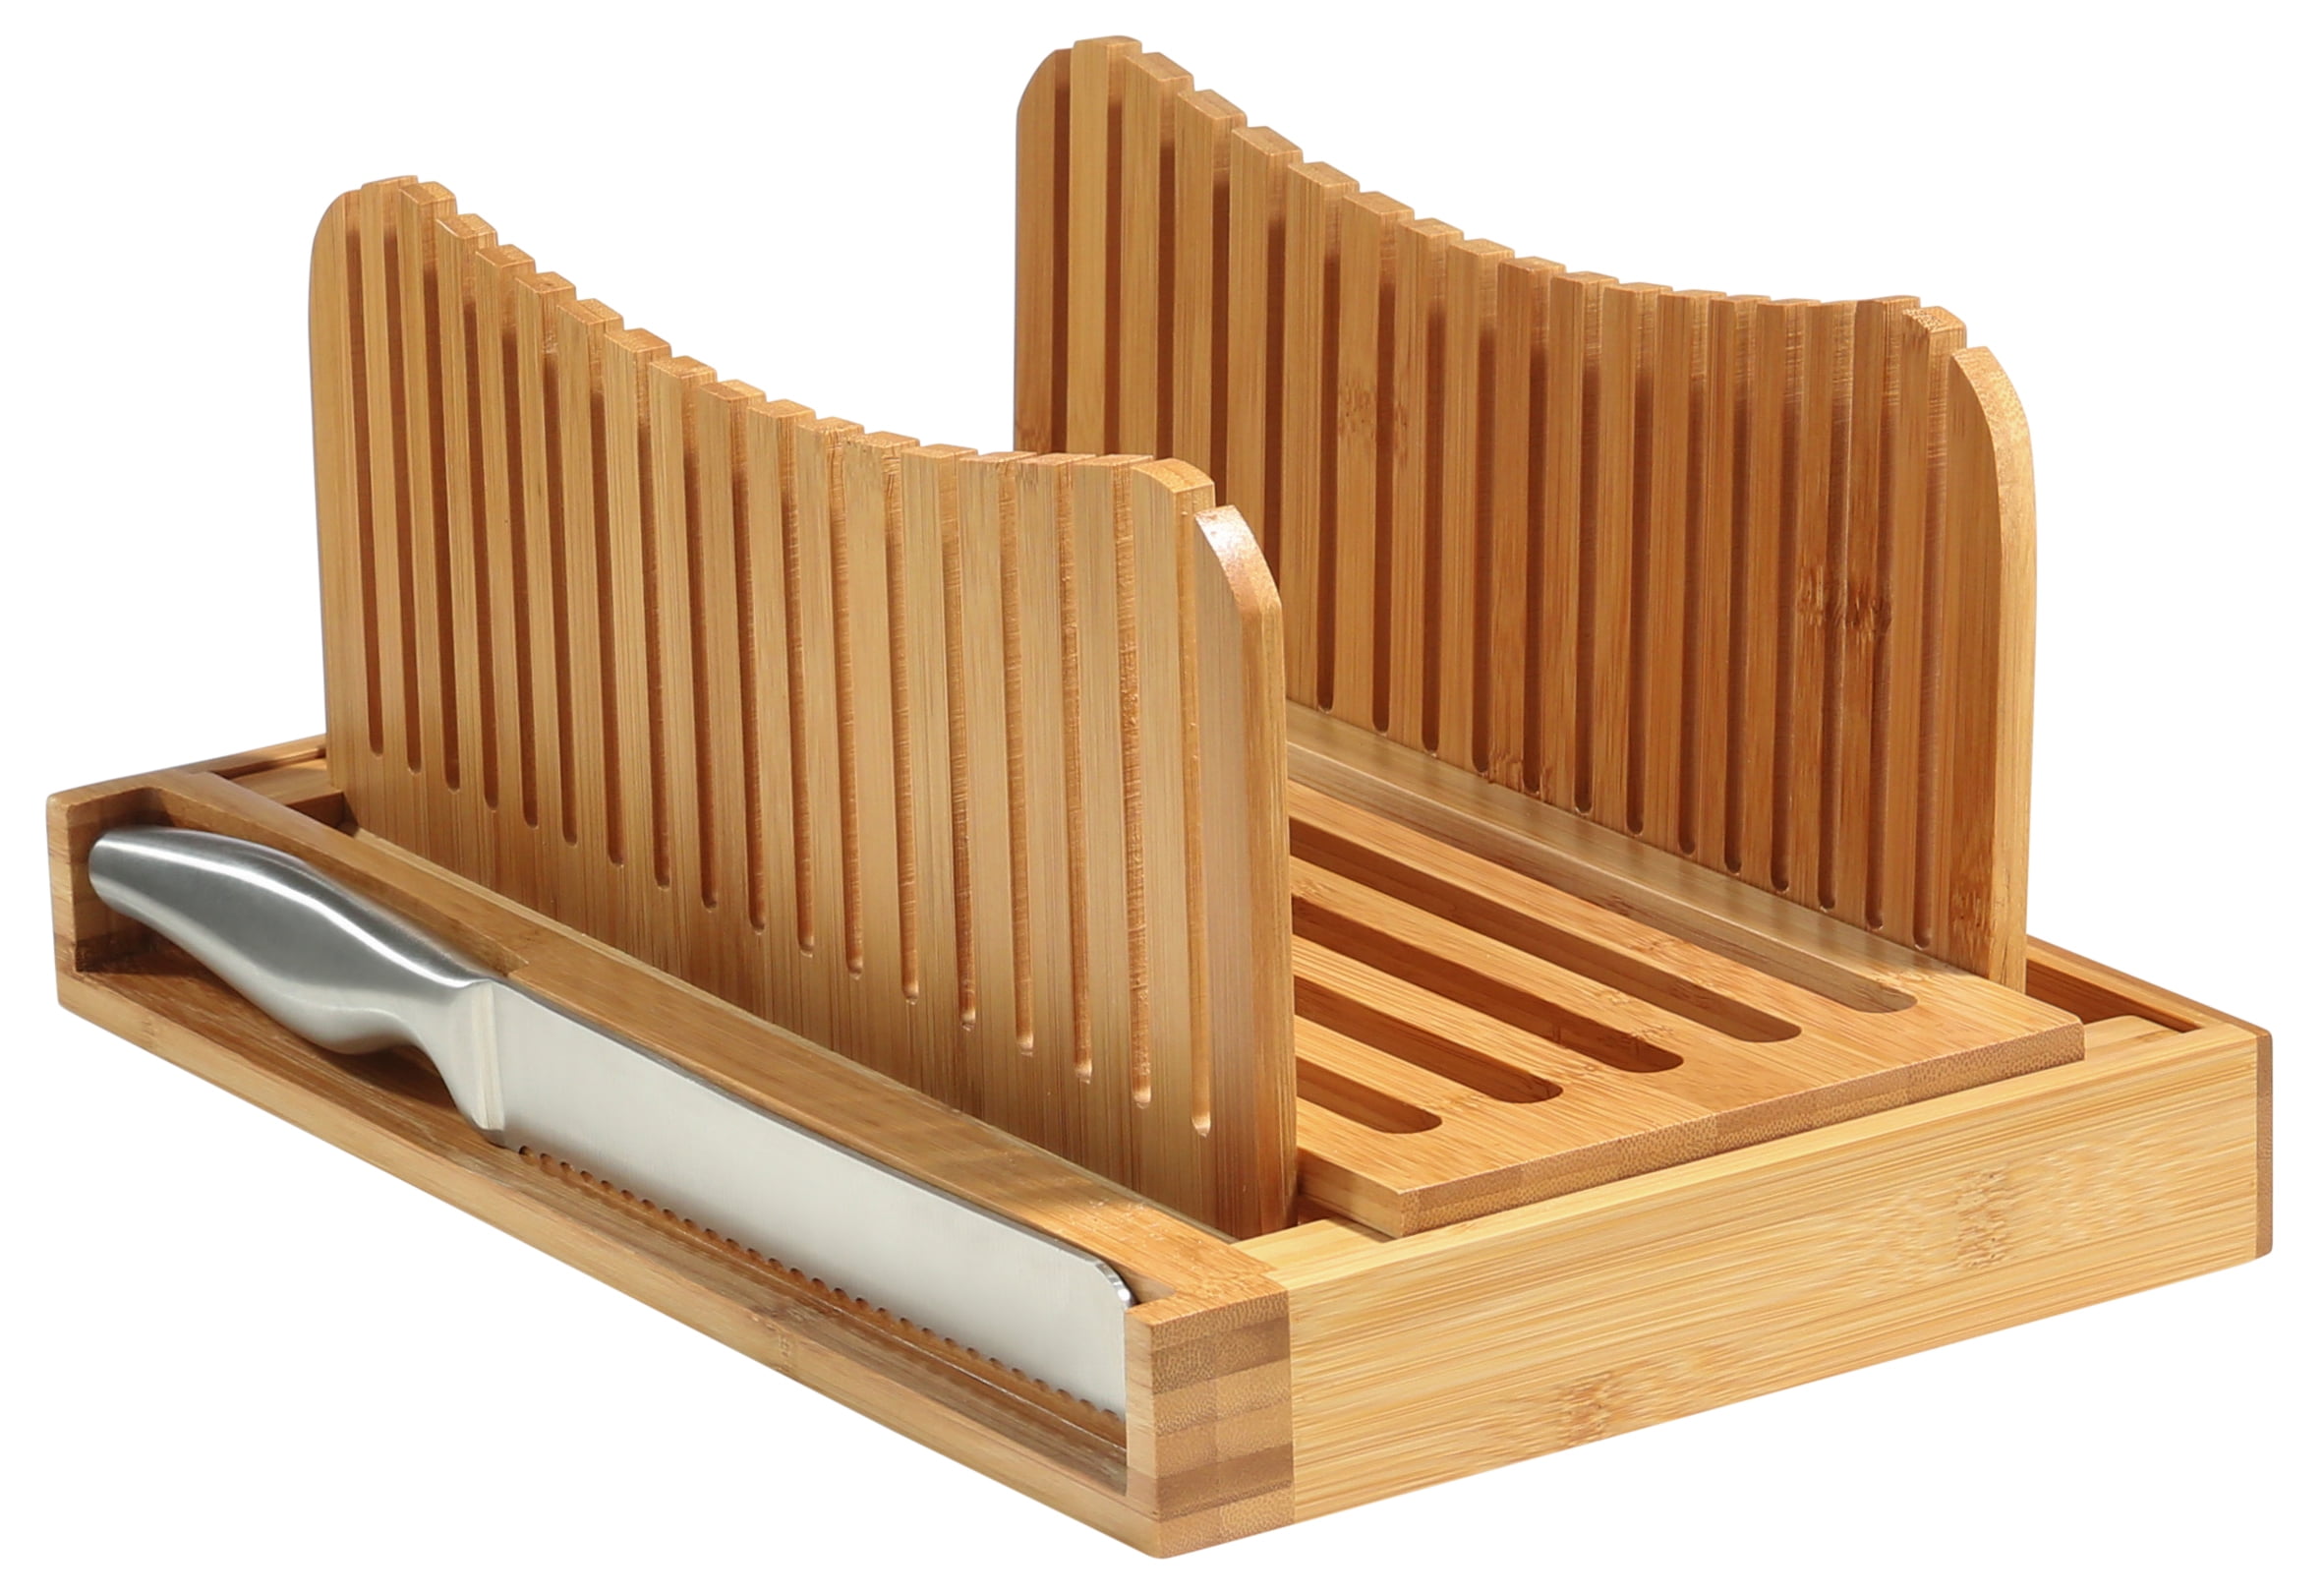 Hastings Home Bamboo Bread Slicer - 20313656